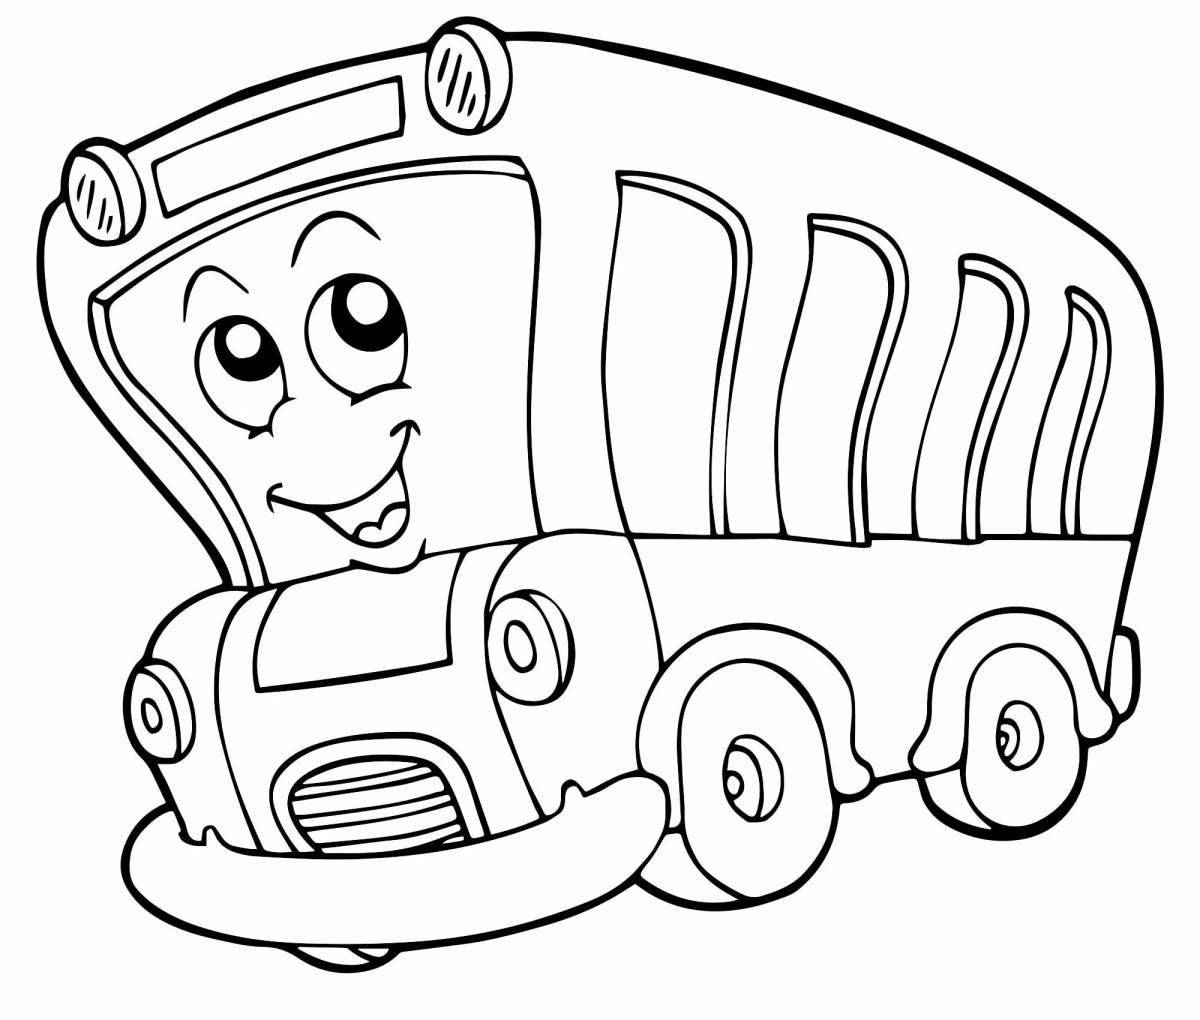 Entertaining coloring bus for children 2-3 years old